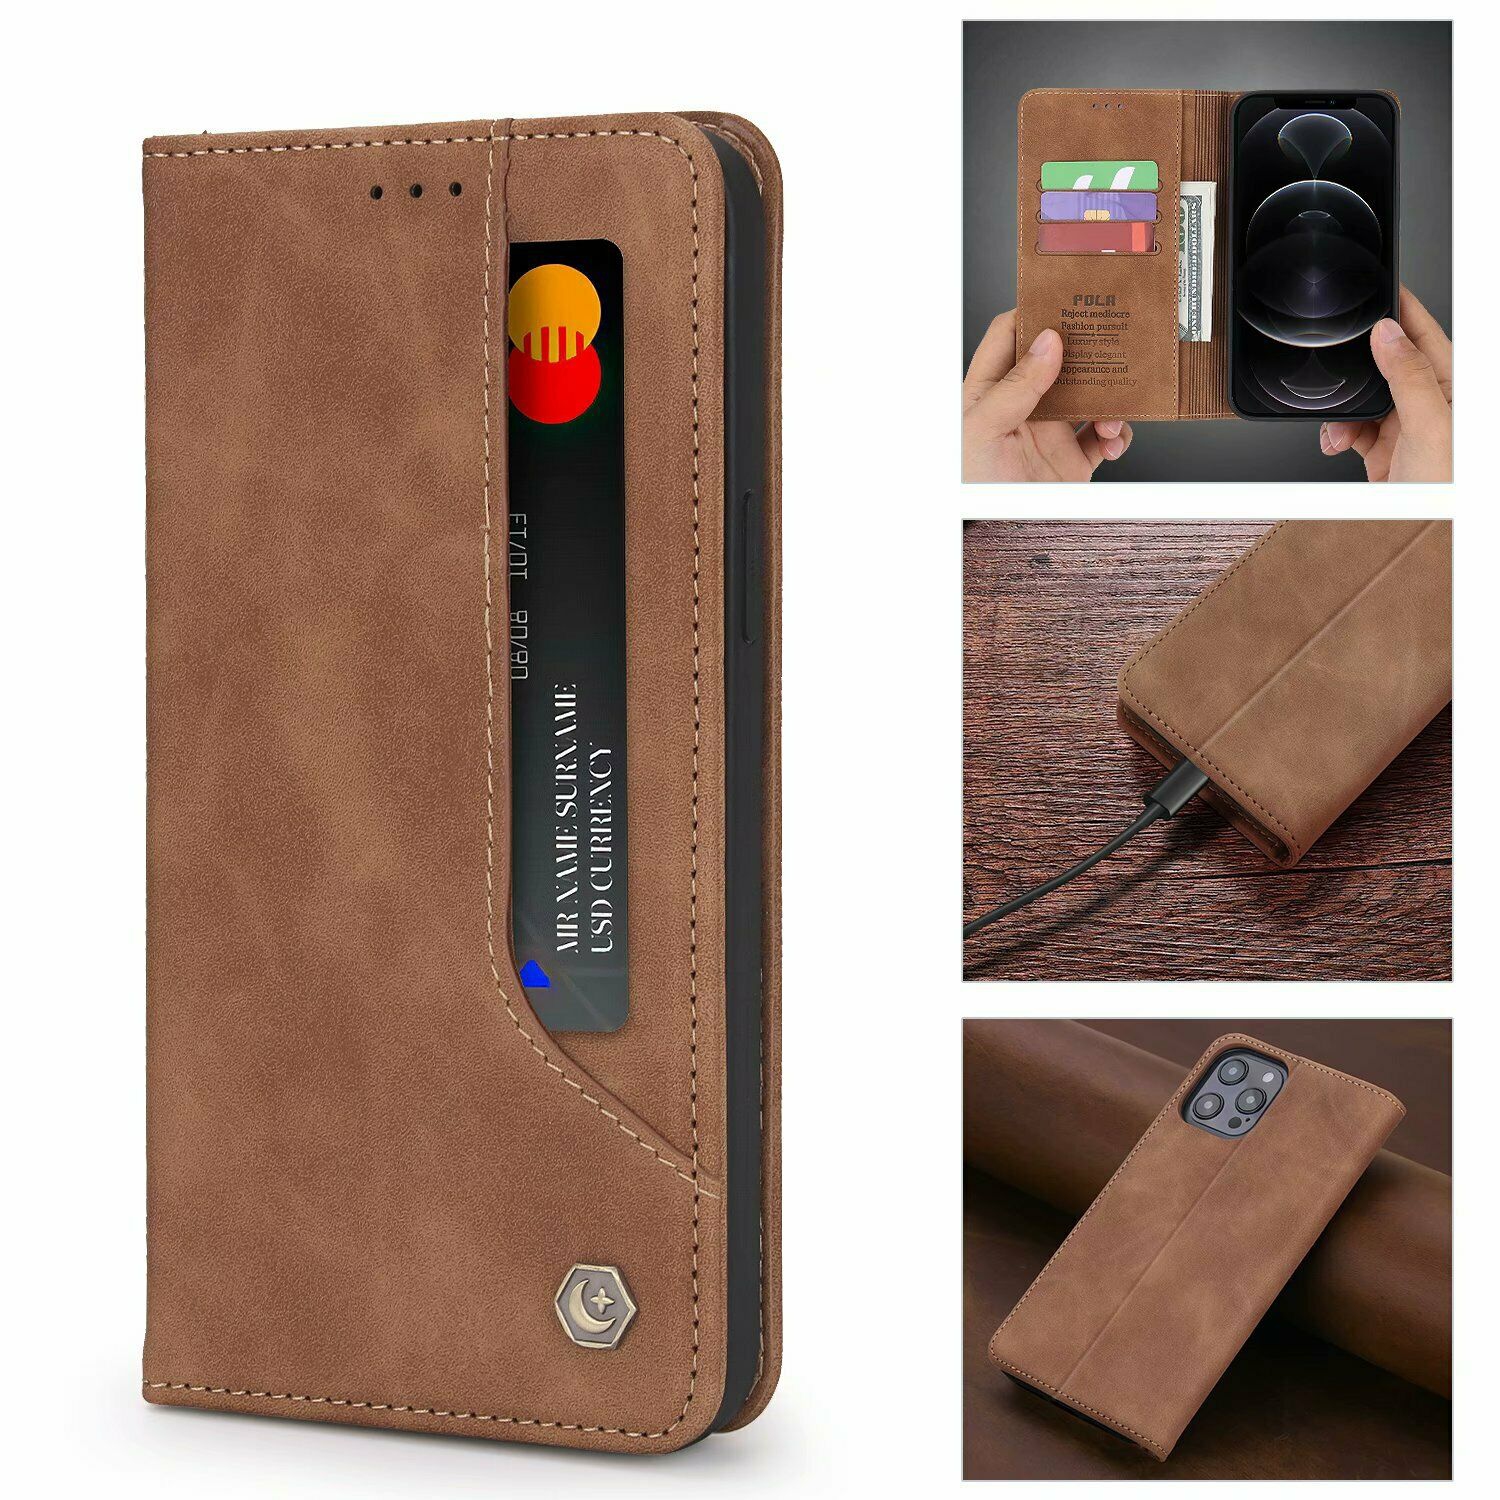 iPhone 8 Plus Flip Case Cover for Leather Card Holders Extra-Shockproof Business Wallet case Kickstand Flip Cover 